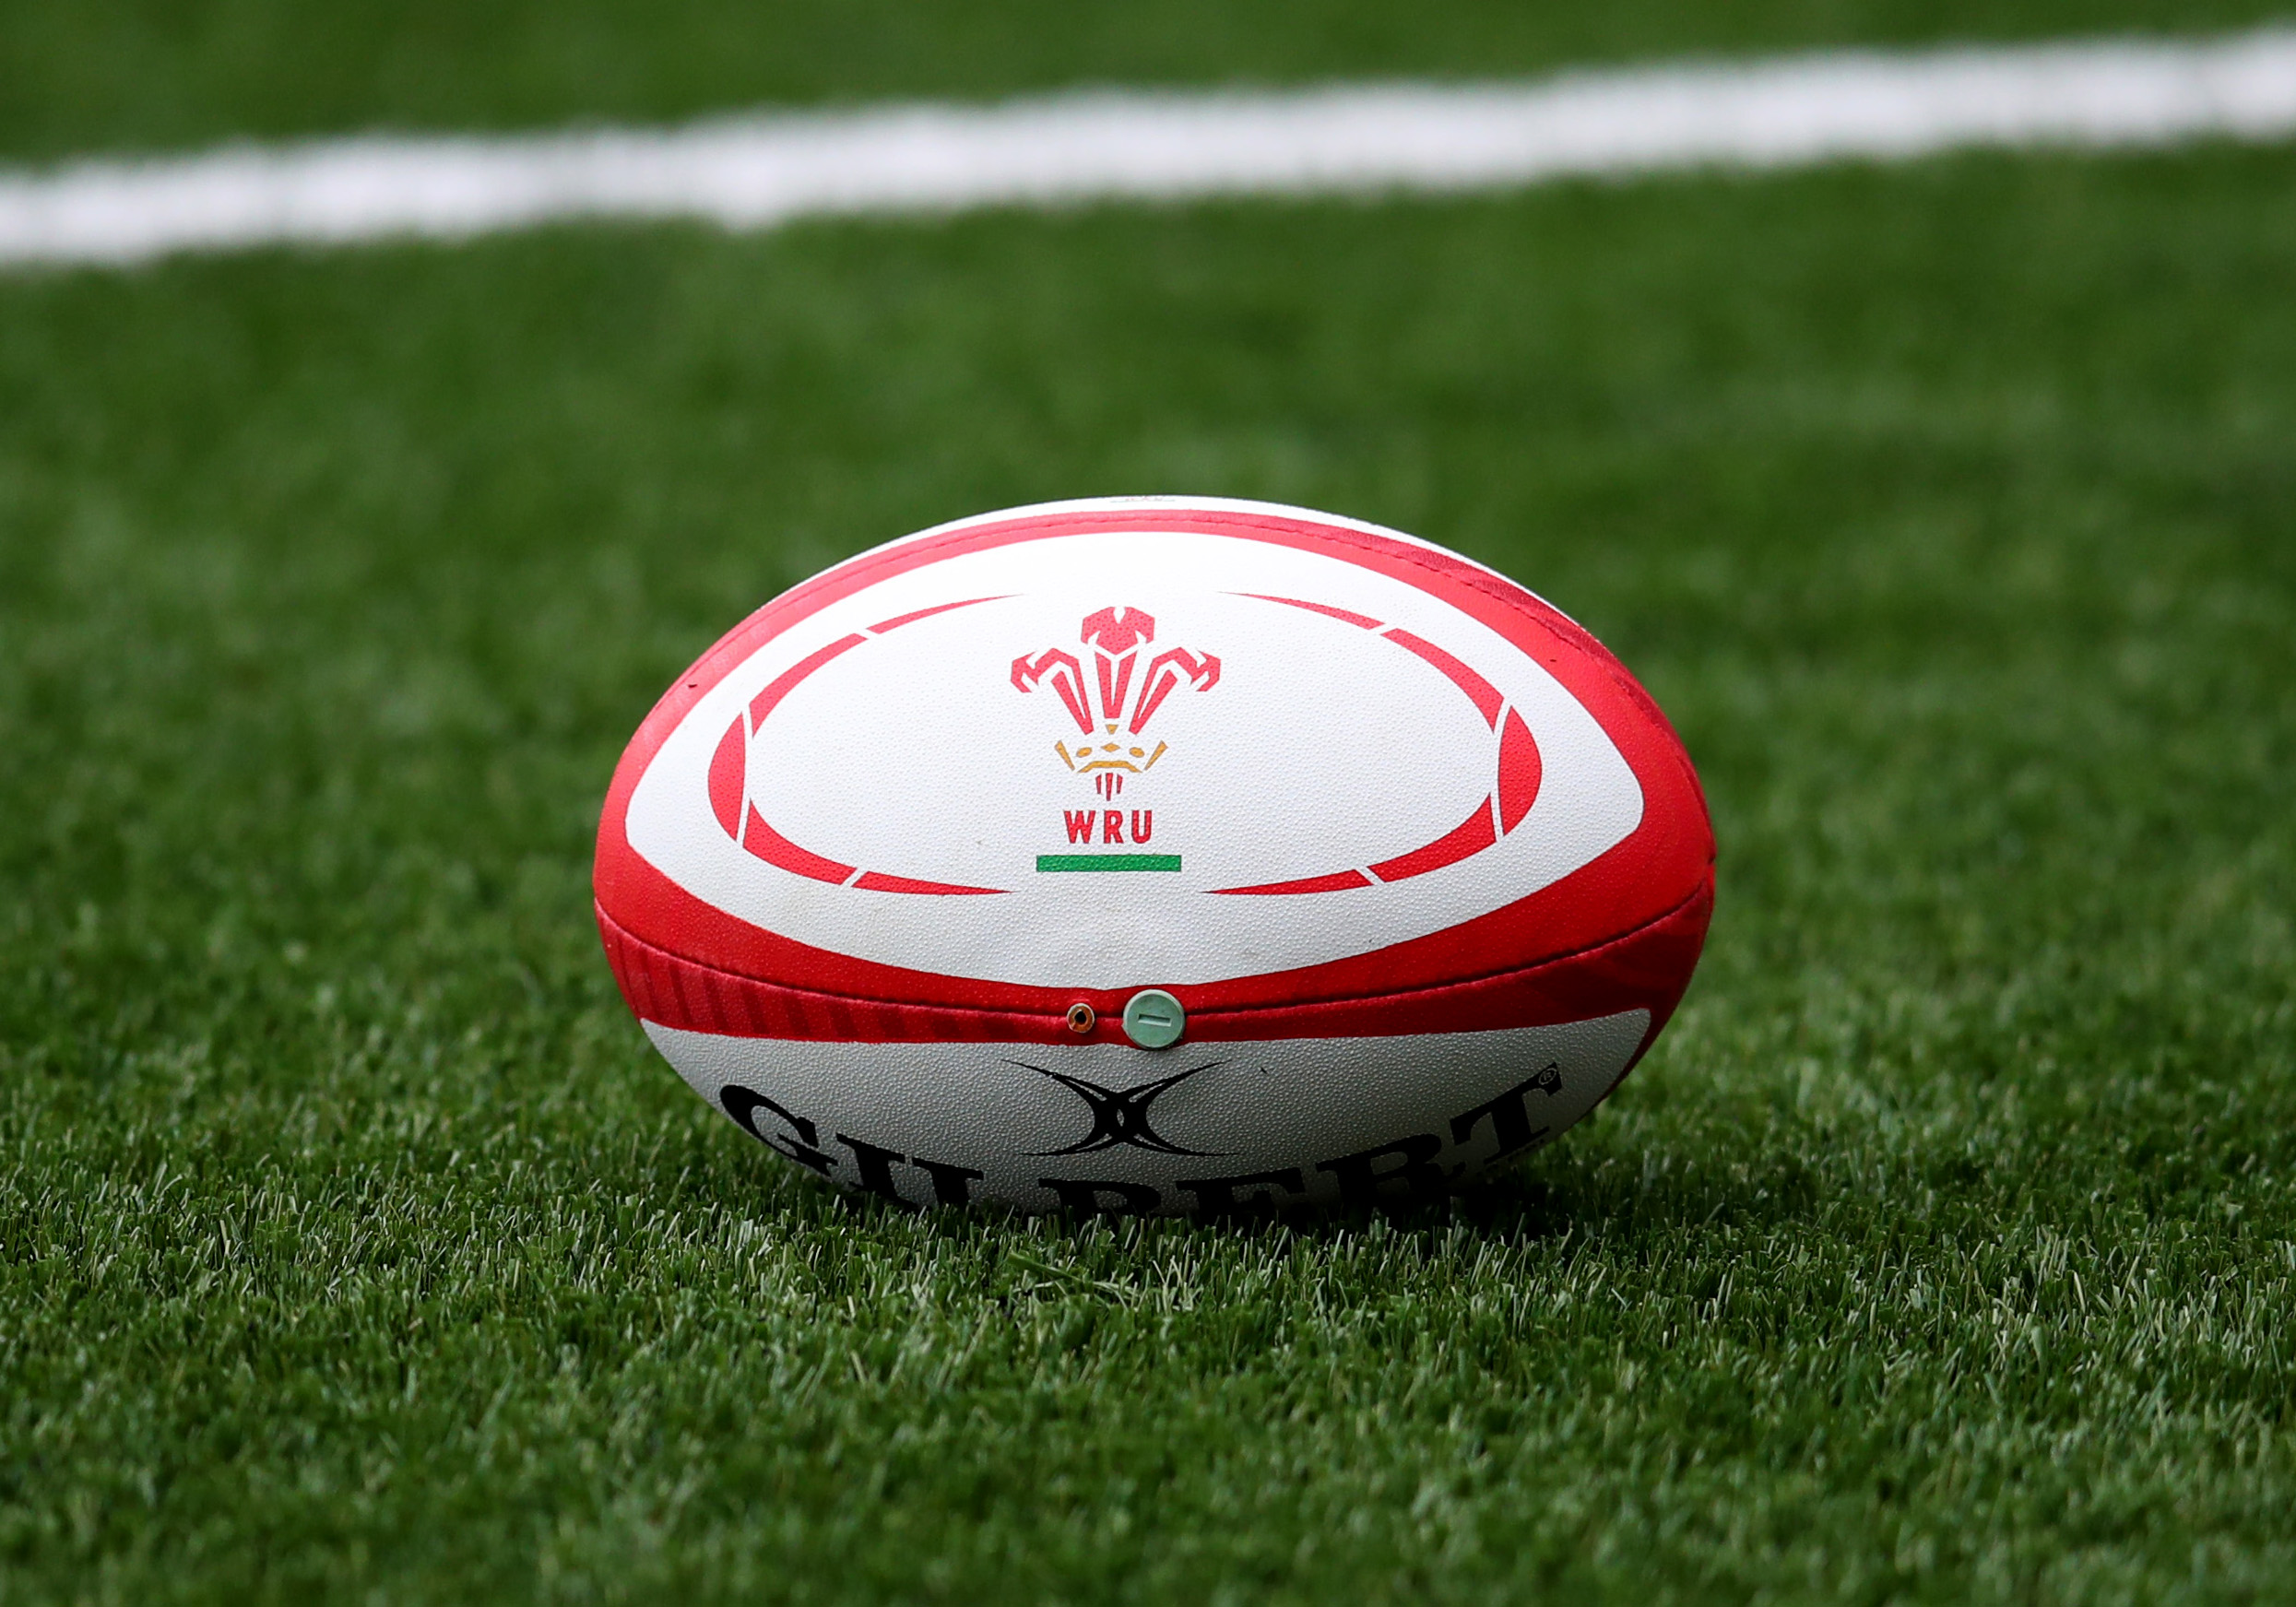 Welsh Rugby Union Accused of Toxic Culture of Sexism by Ex-Employees